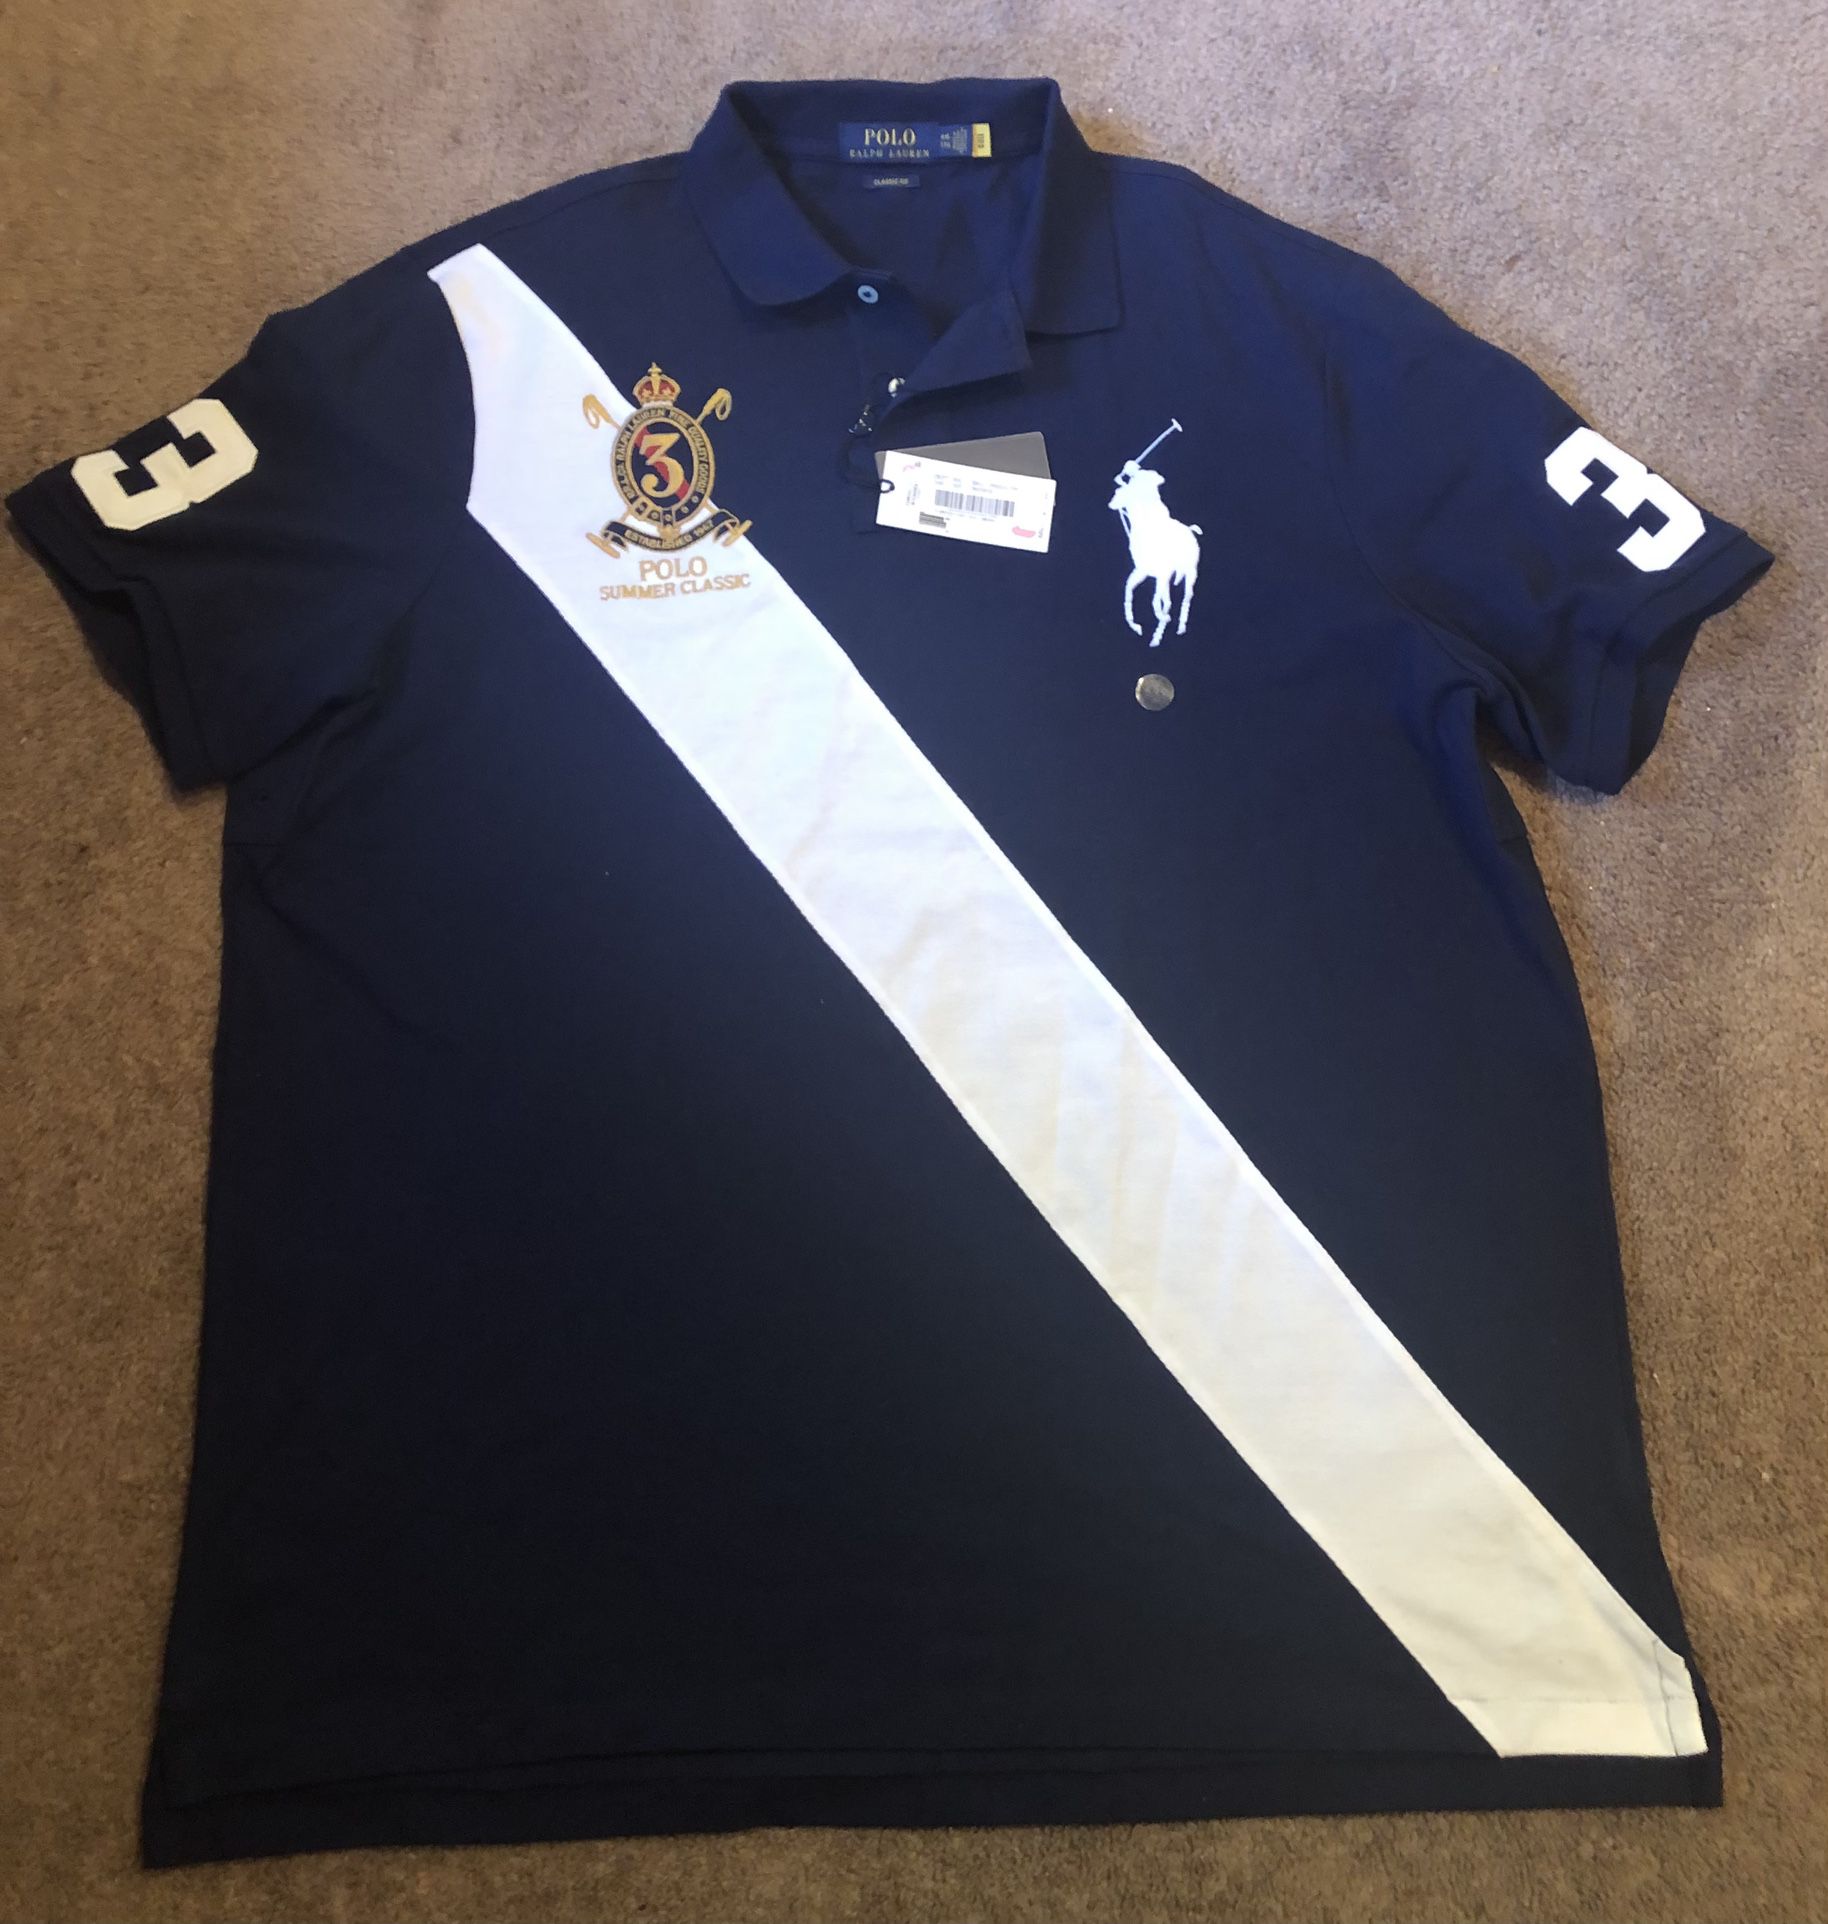 NWT MENS *POLO RALPH LAUREN* CLASSIC FIT BIG PONY RUGBY POLO SHIRT XXL $99